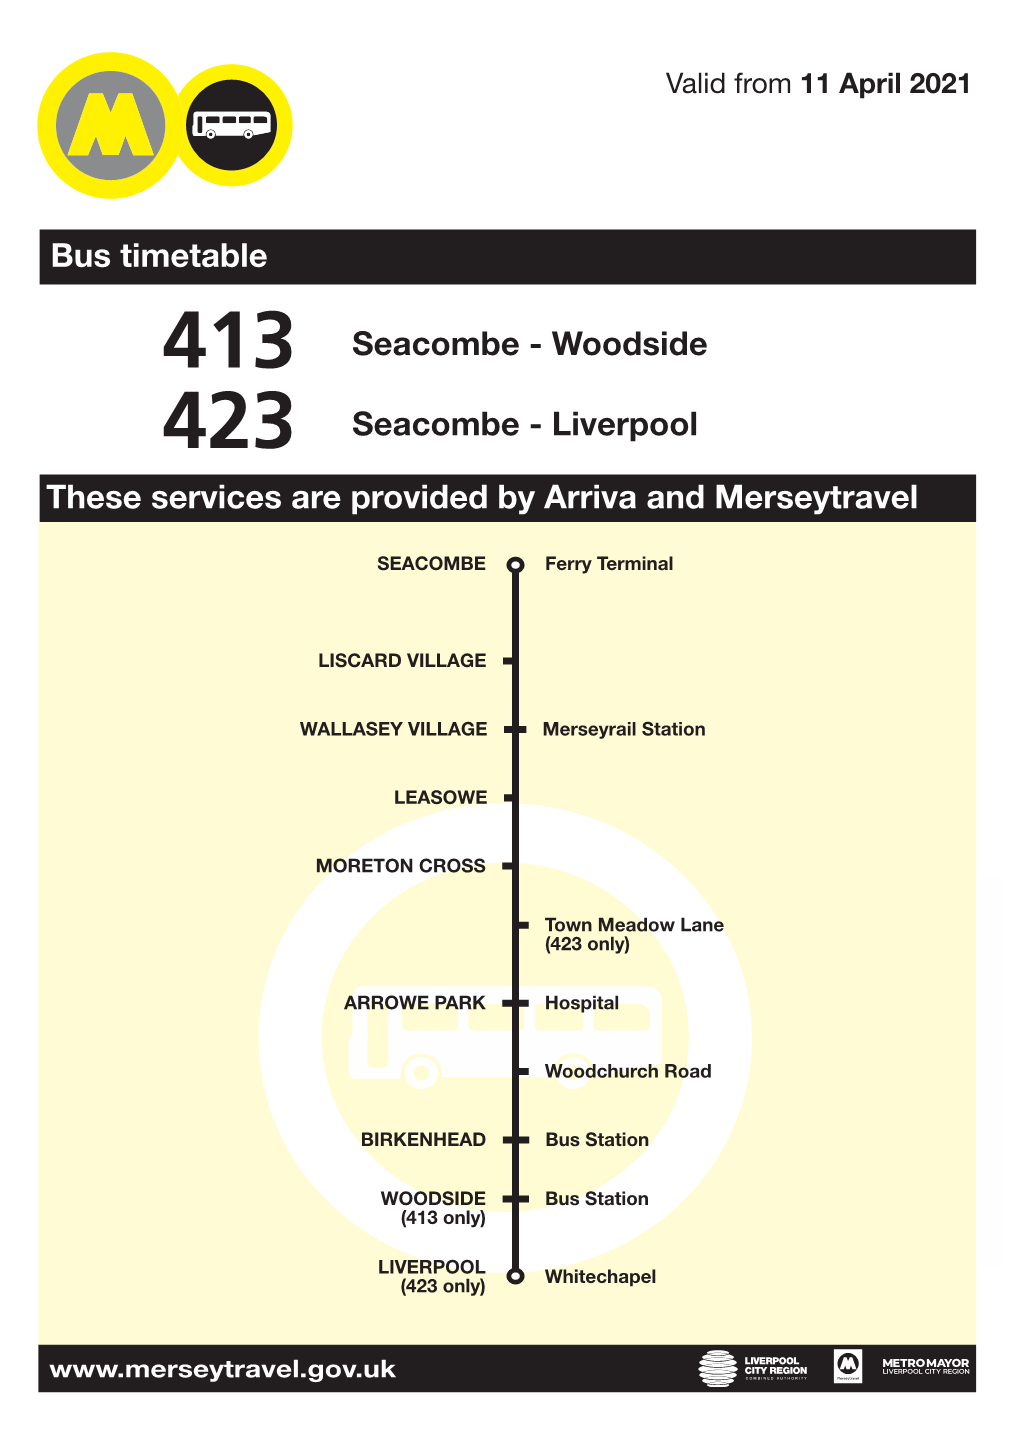 Bus Timetable These Services Are Provided by Arriva and Merseytravel